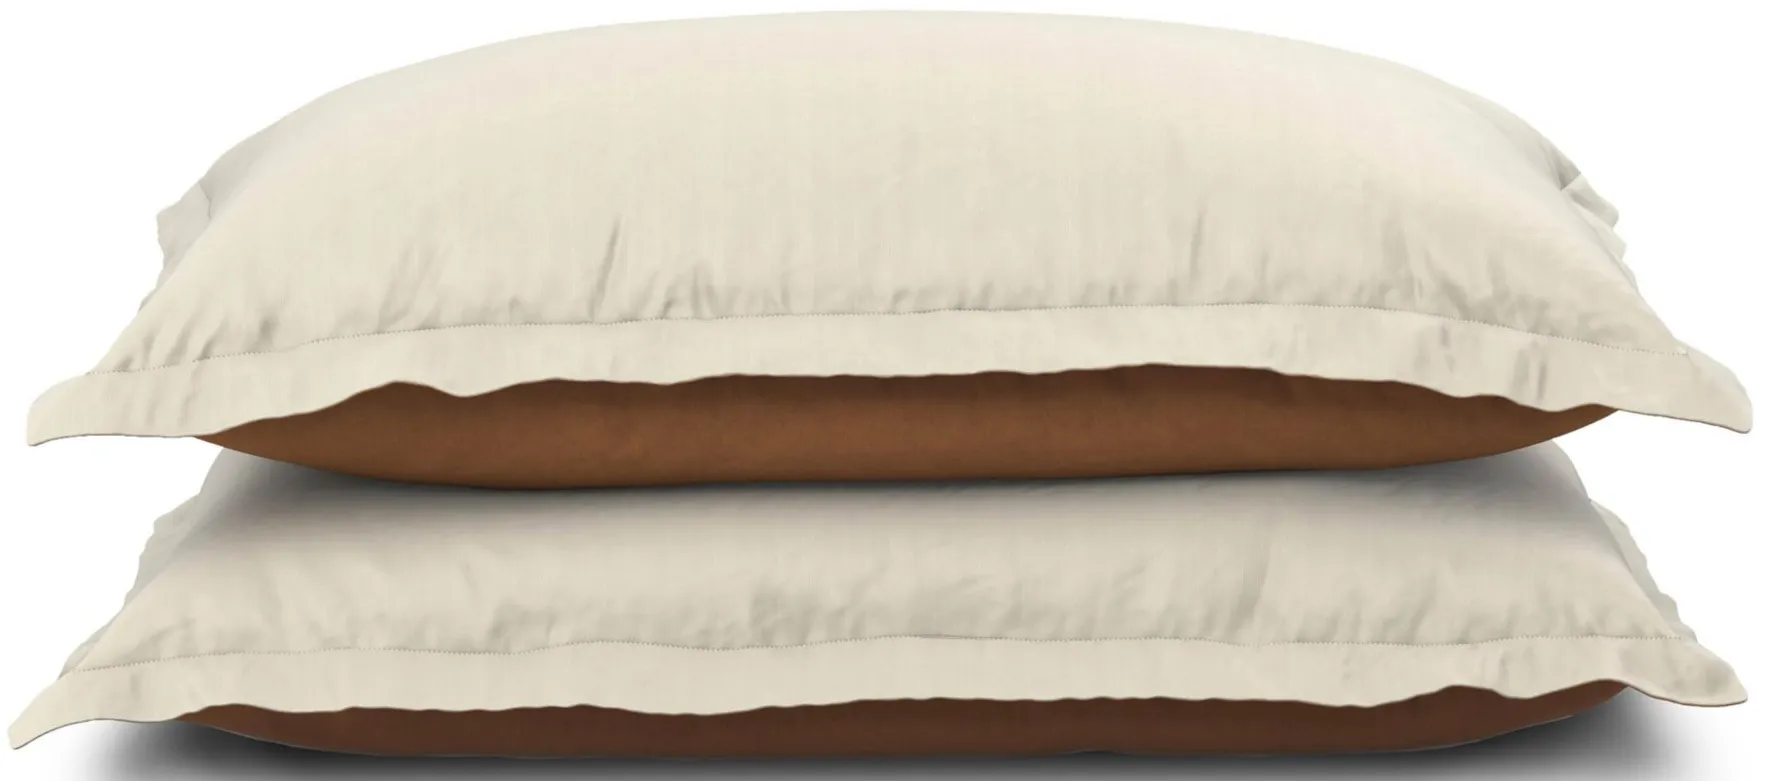 PureCare Dual-Sided Pillow Sham Set - Cooling + Bamboo in Ivory / Clay by PureCare